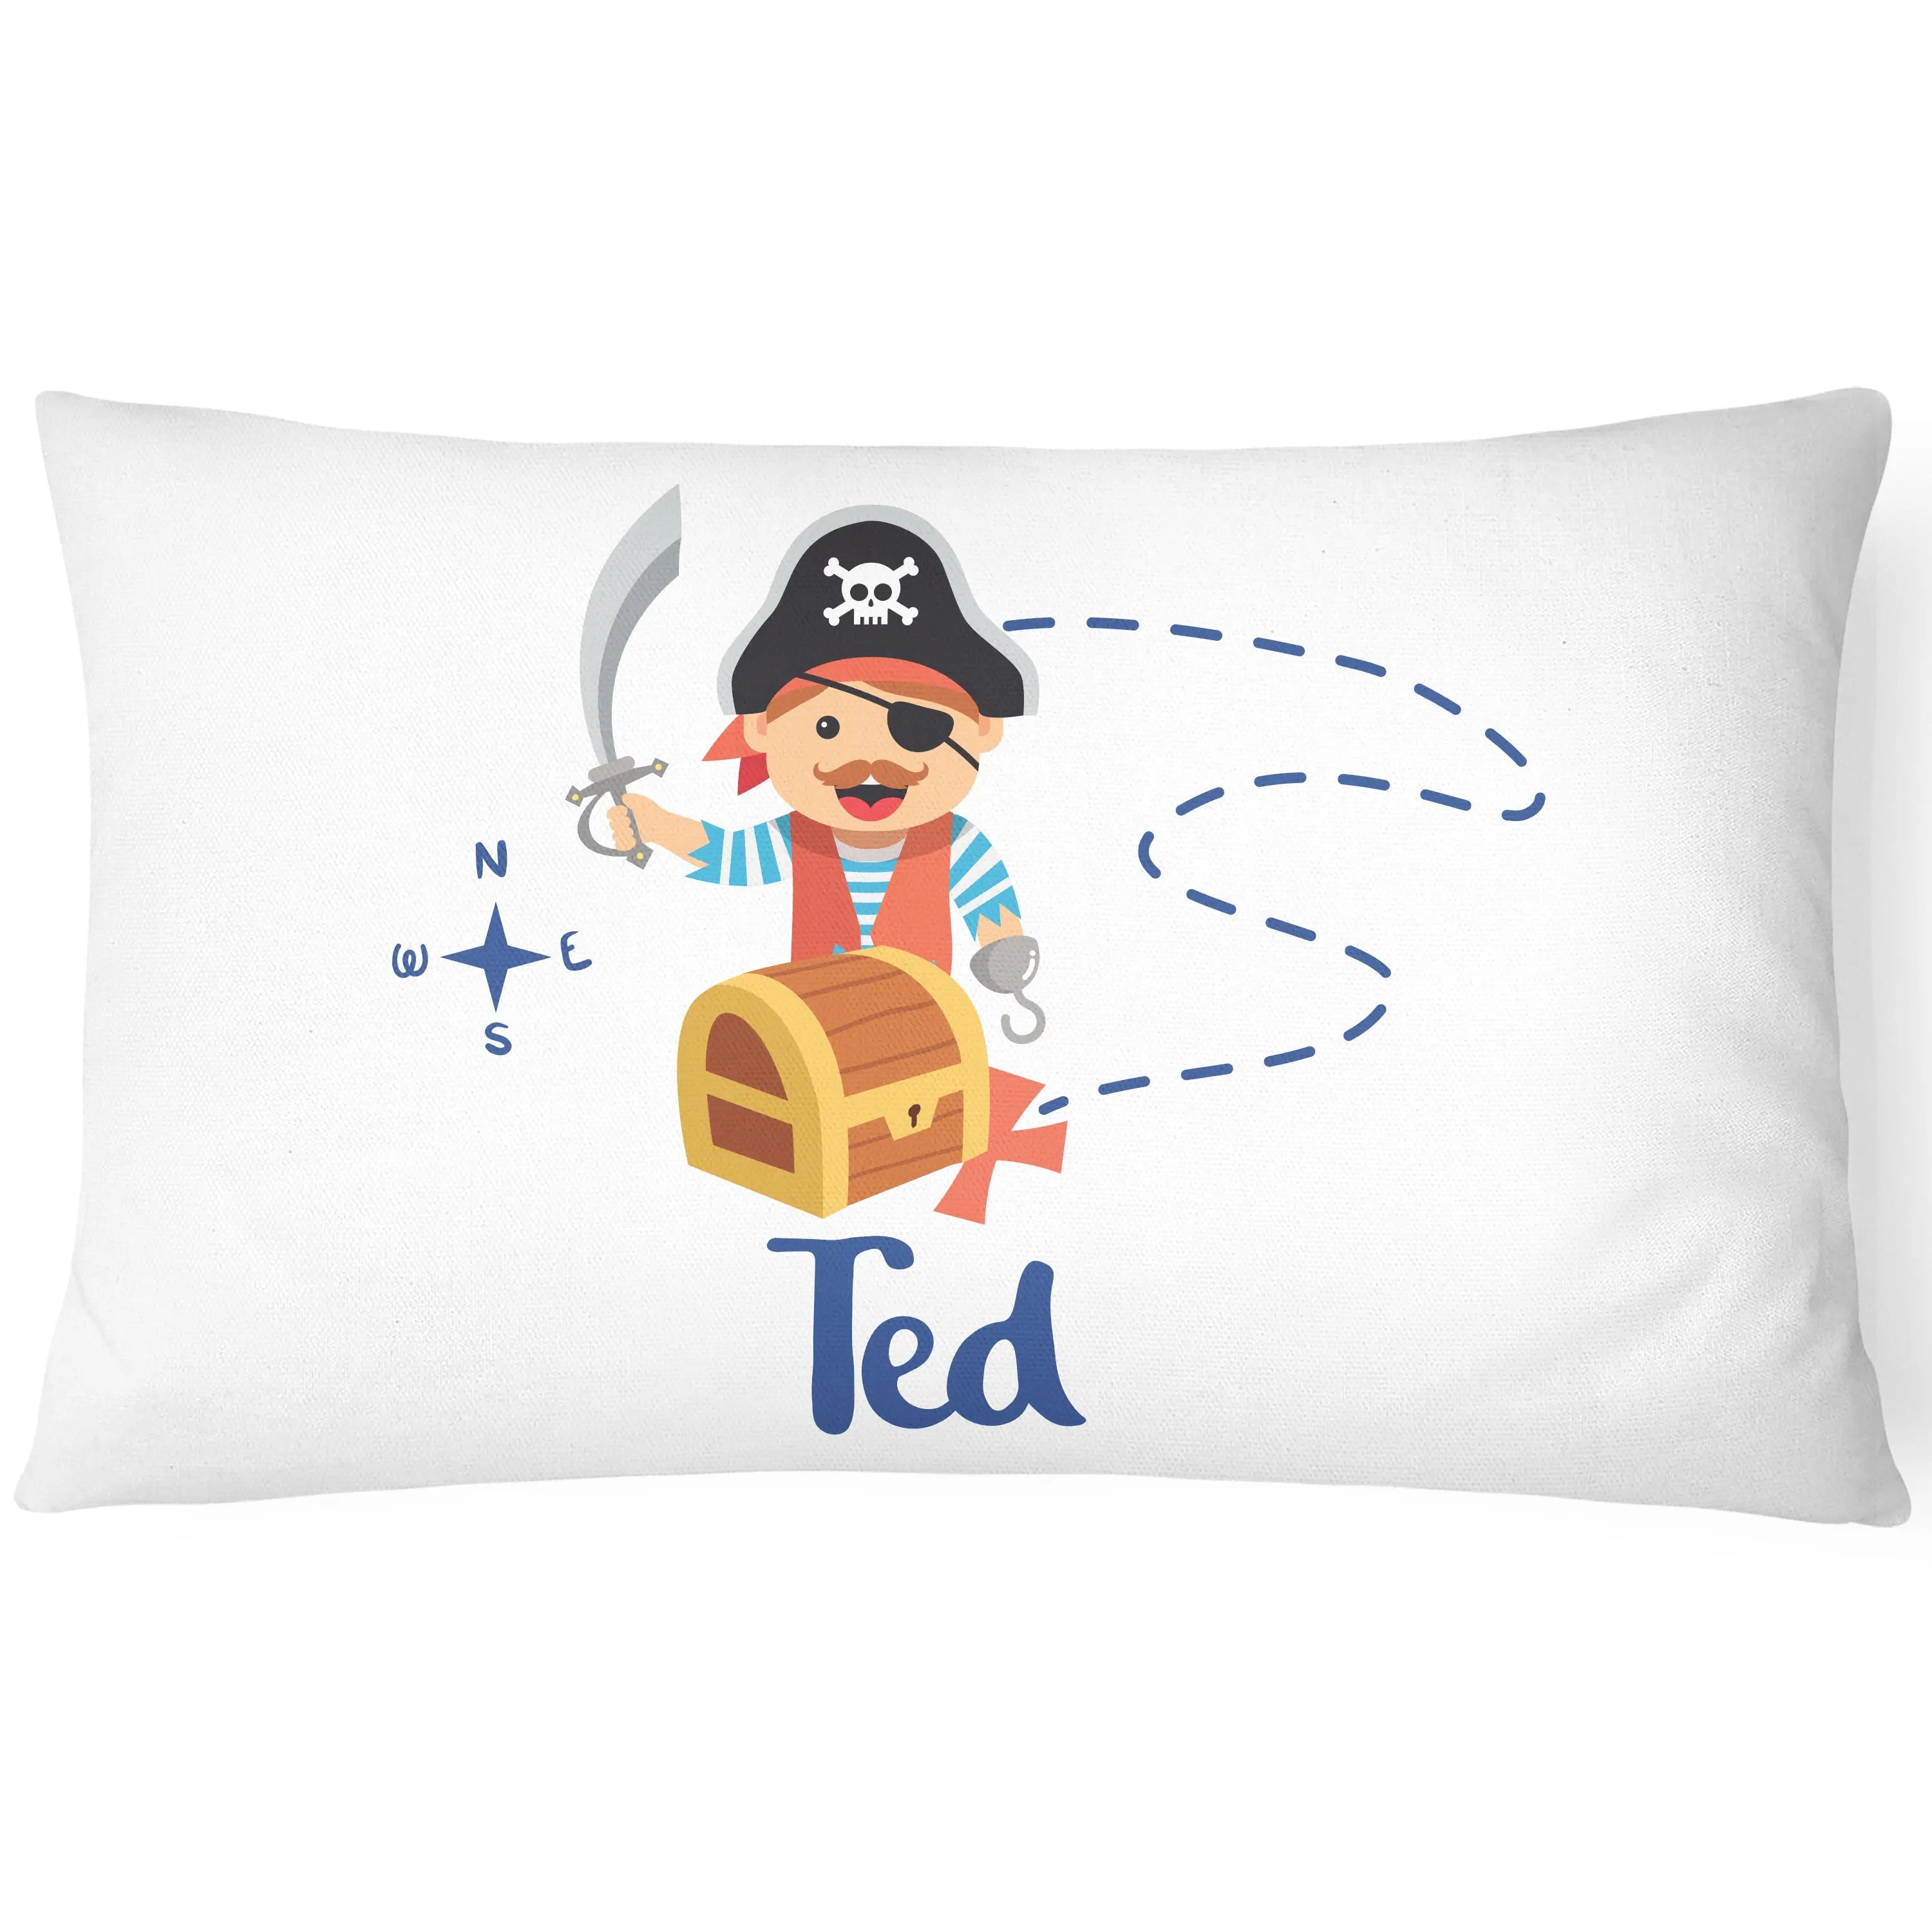 Pirate Pillowcase for Kids - Personalise With Any Name - Perfect Children's Gift - Orange - CushionPop